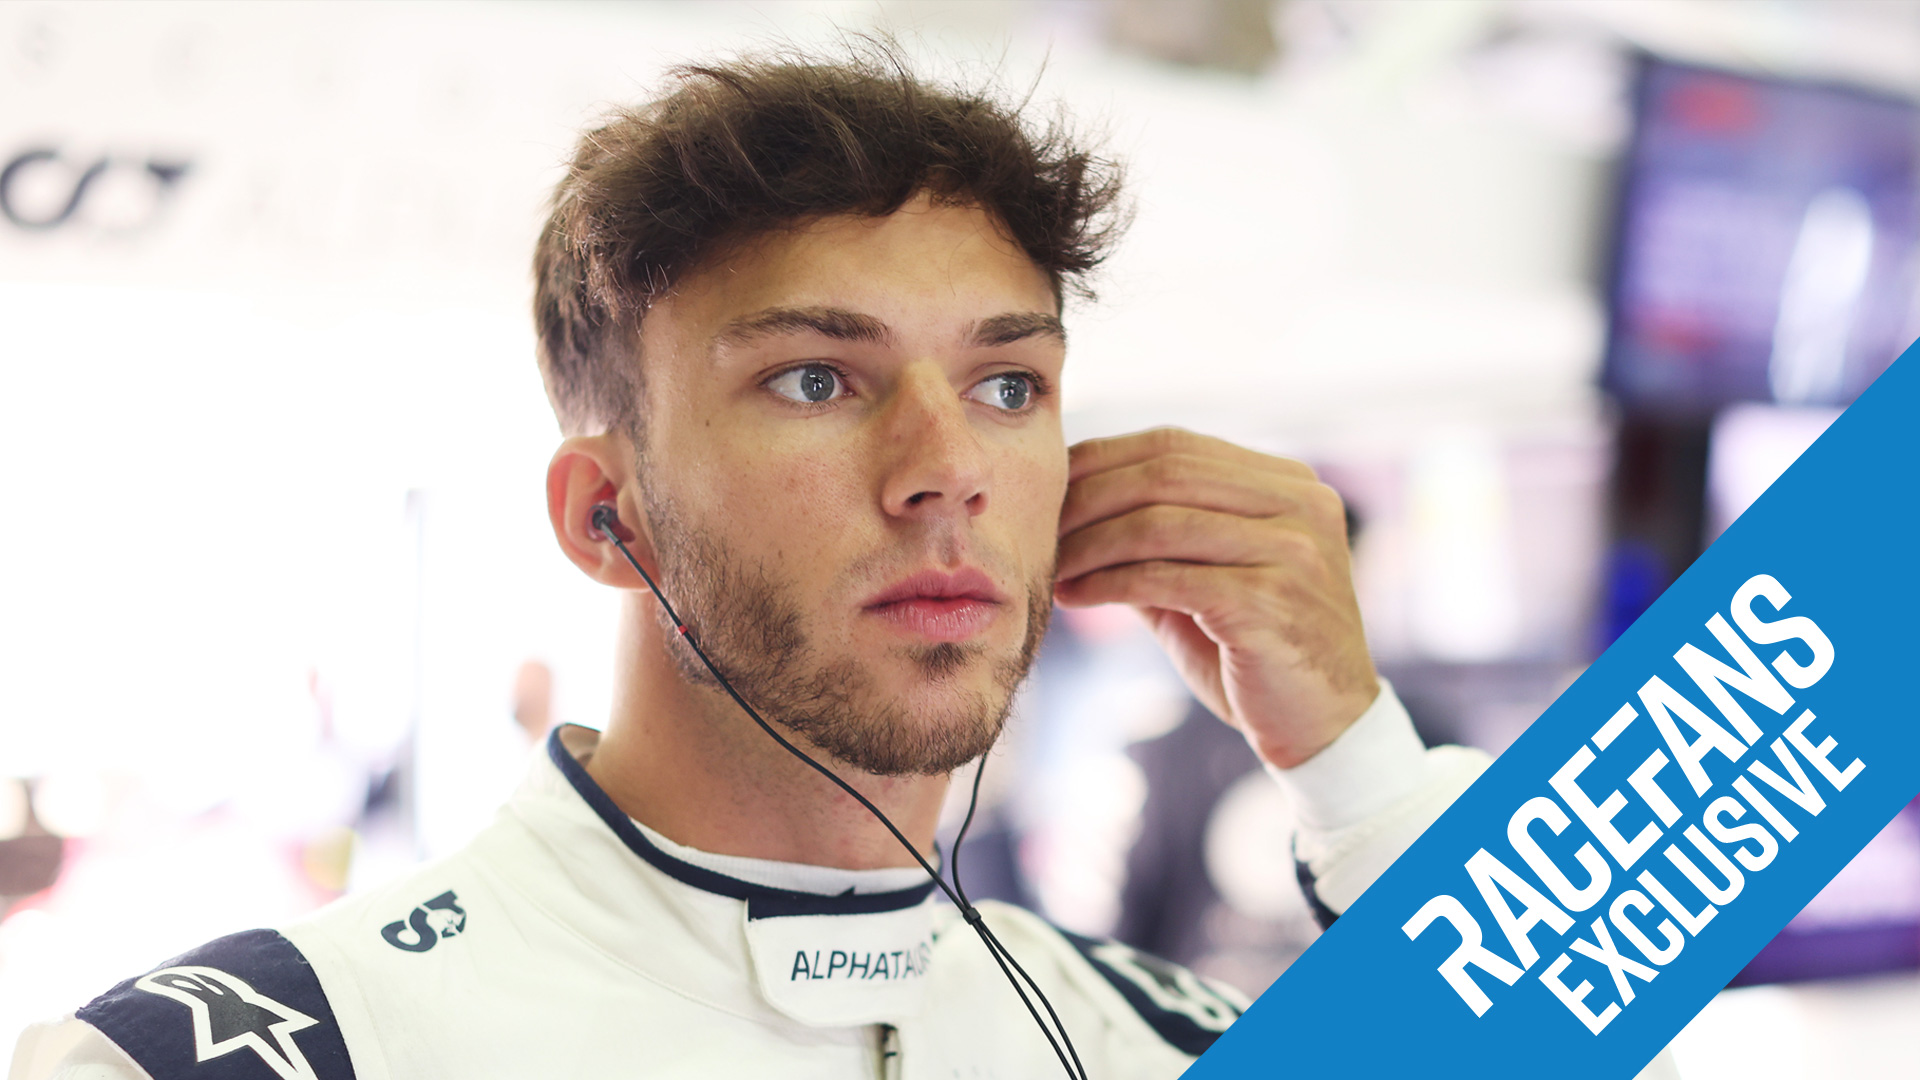 ‘I belong with Verstappen, Leclerc, Russell and Norris’ – Pierre Gasly exclusive interview | 2022 F1 season